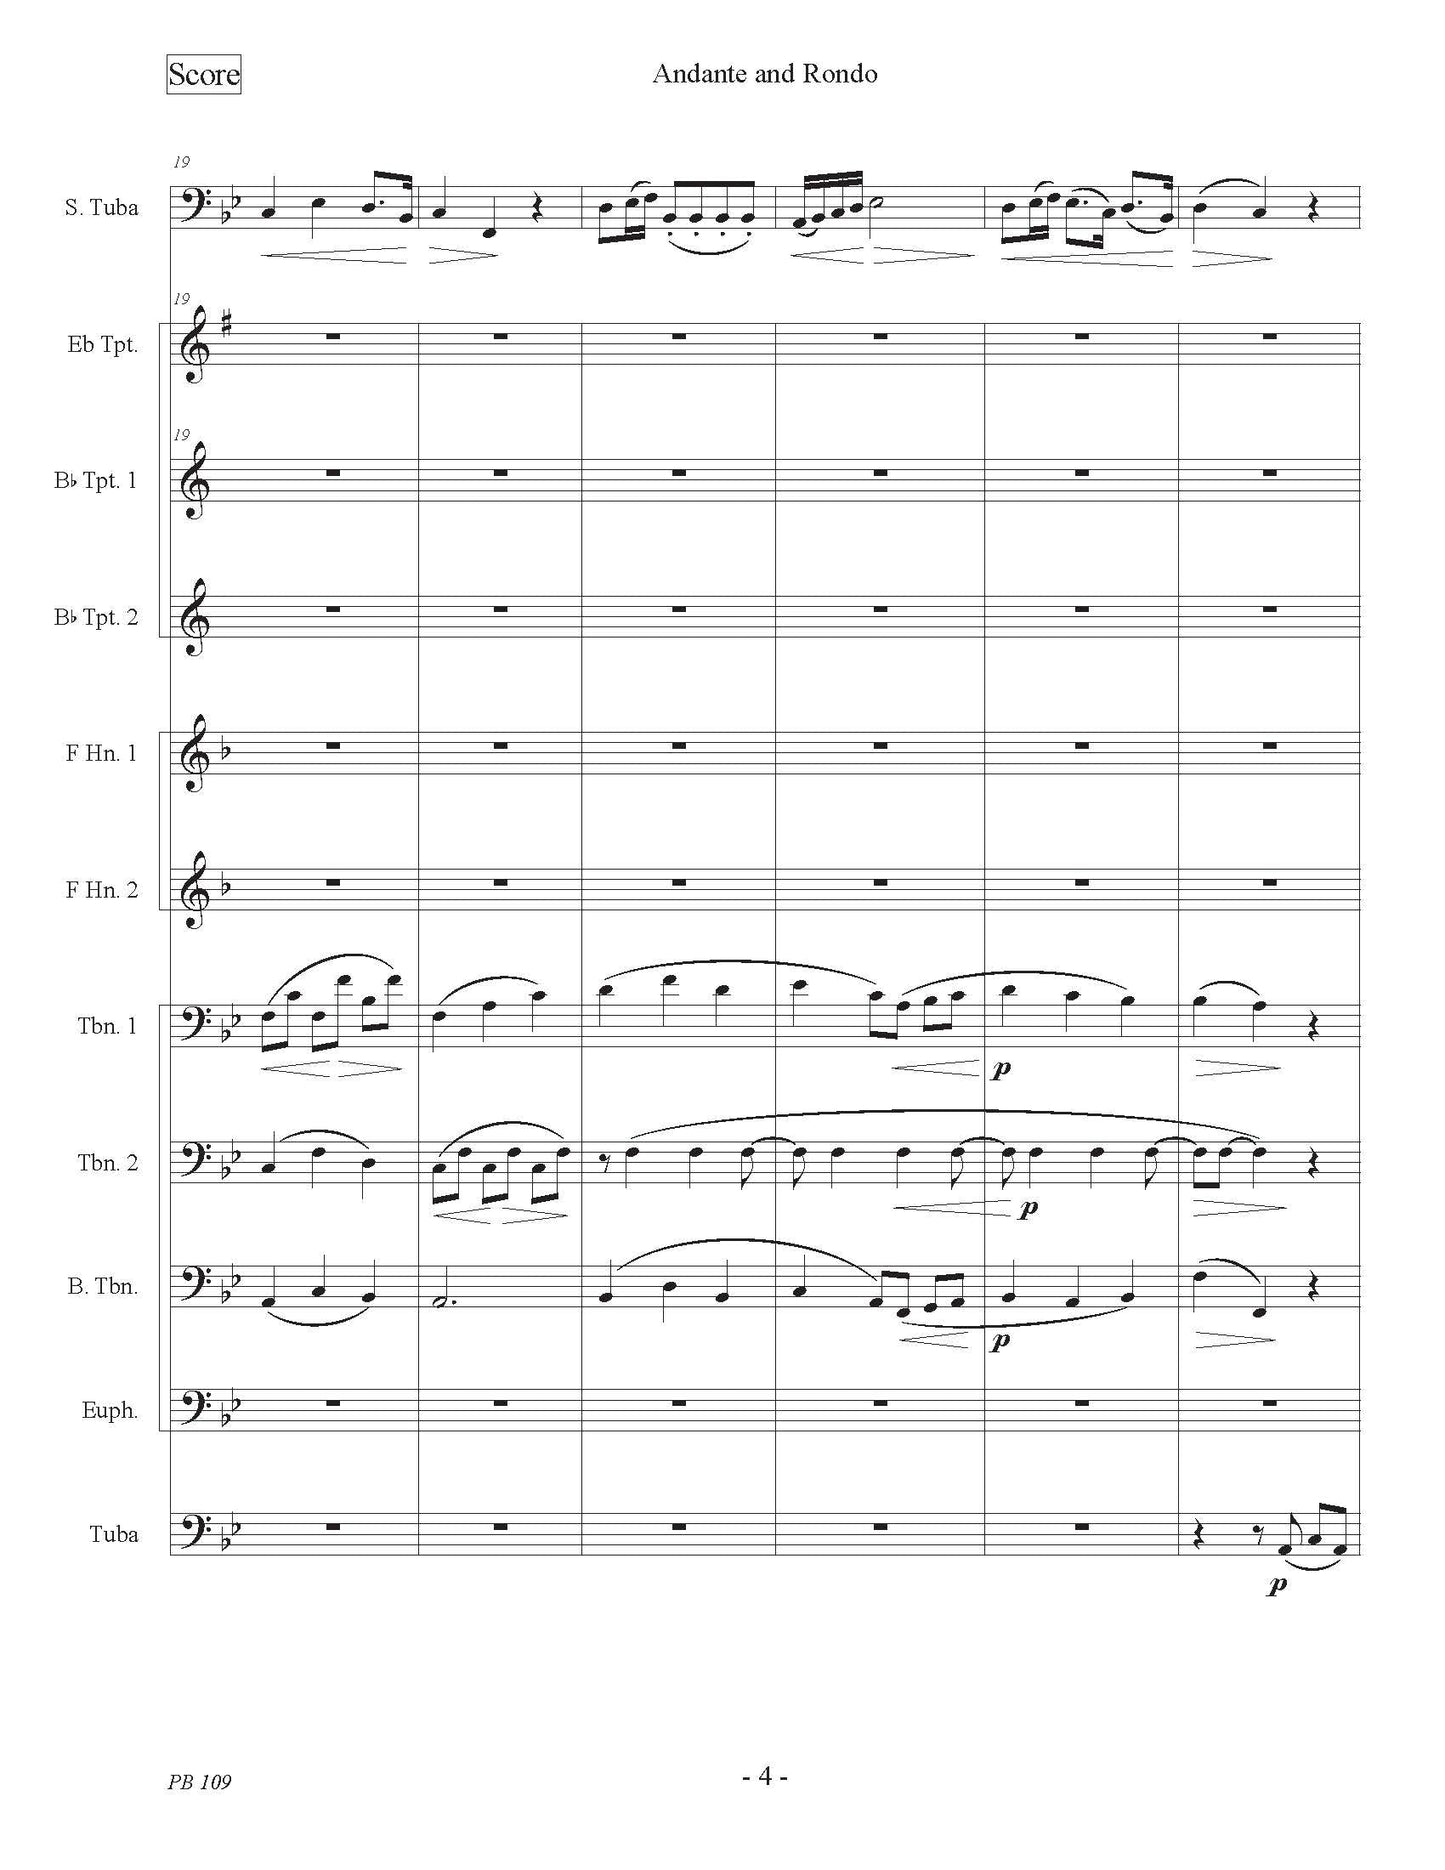 Capuzzi arr. Olt - Andante and Rondo for Solo Tuba and Brass Ensemble - DOWNLOAD